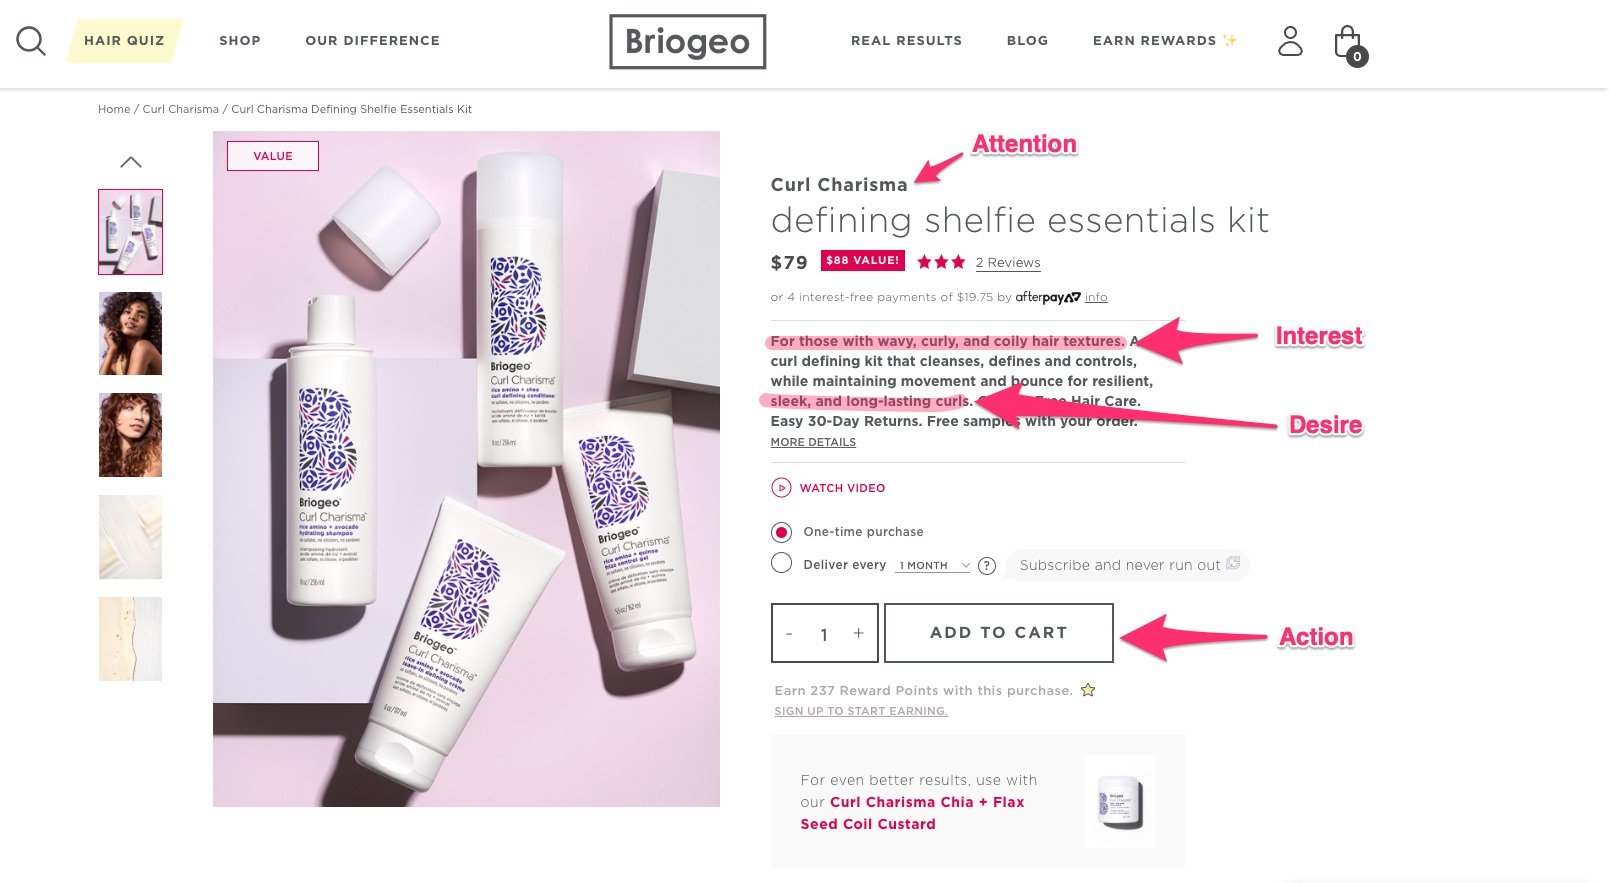 Briogeo's product page used AIDA to effectively market their merchandise.